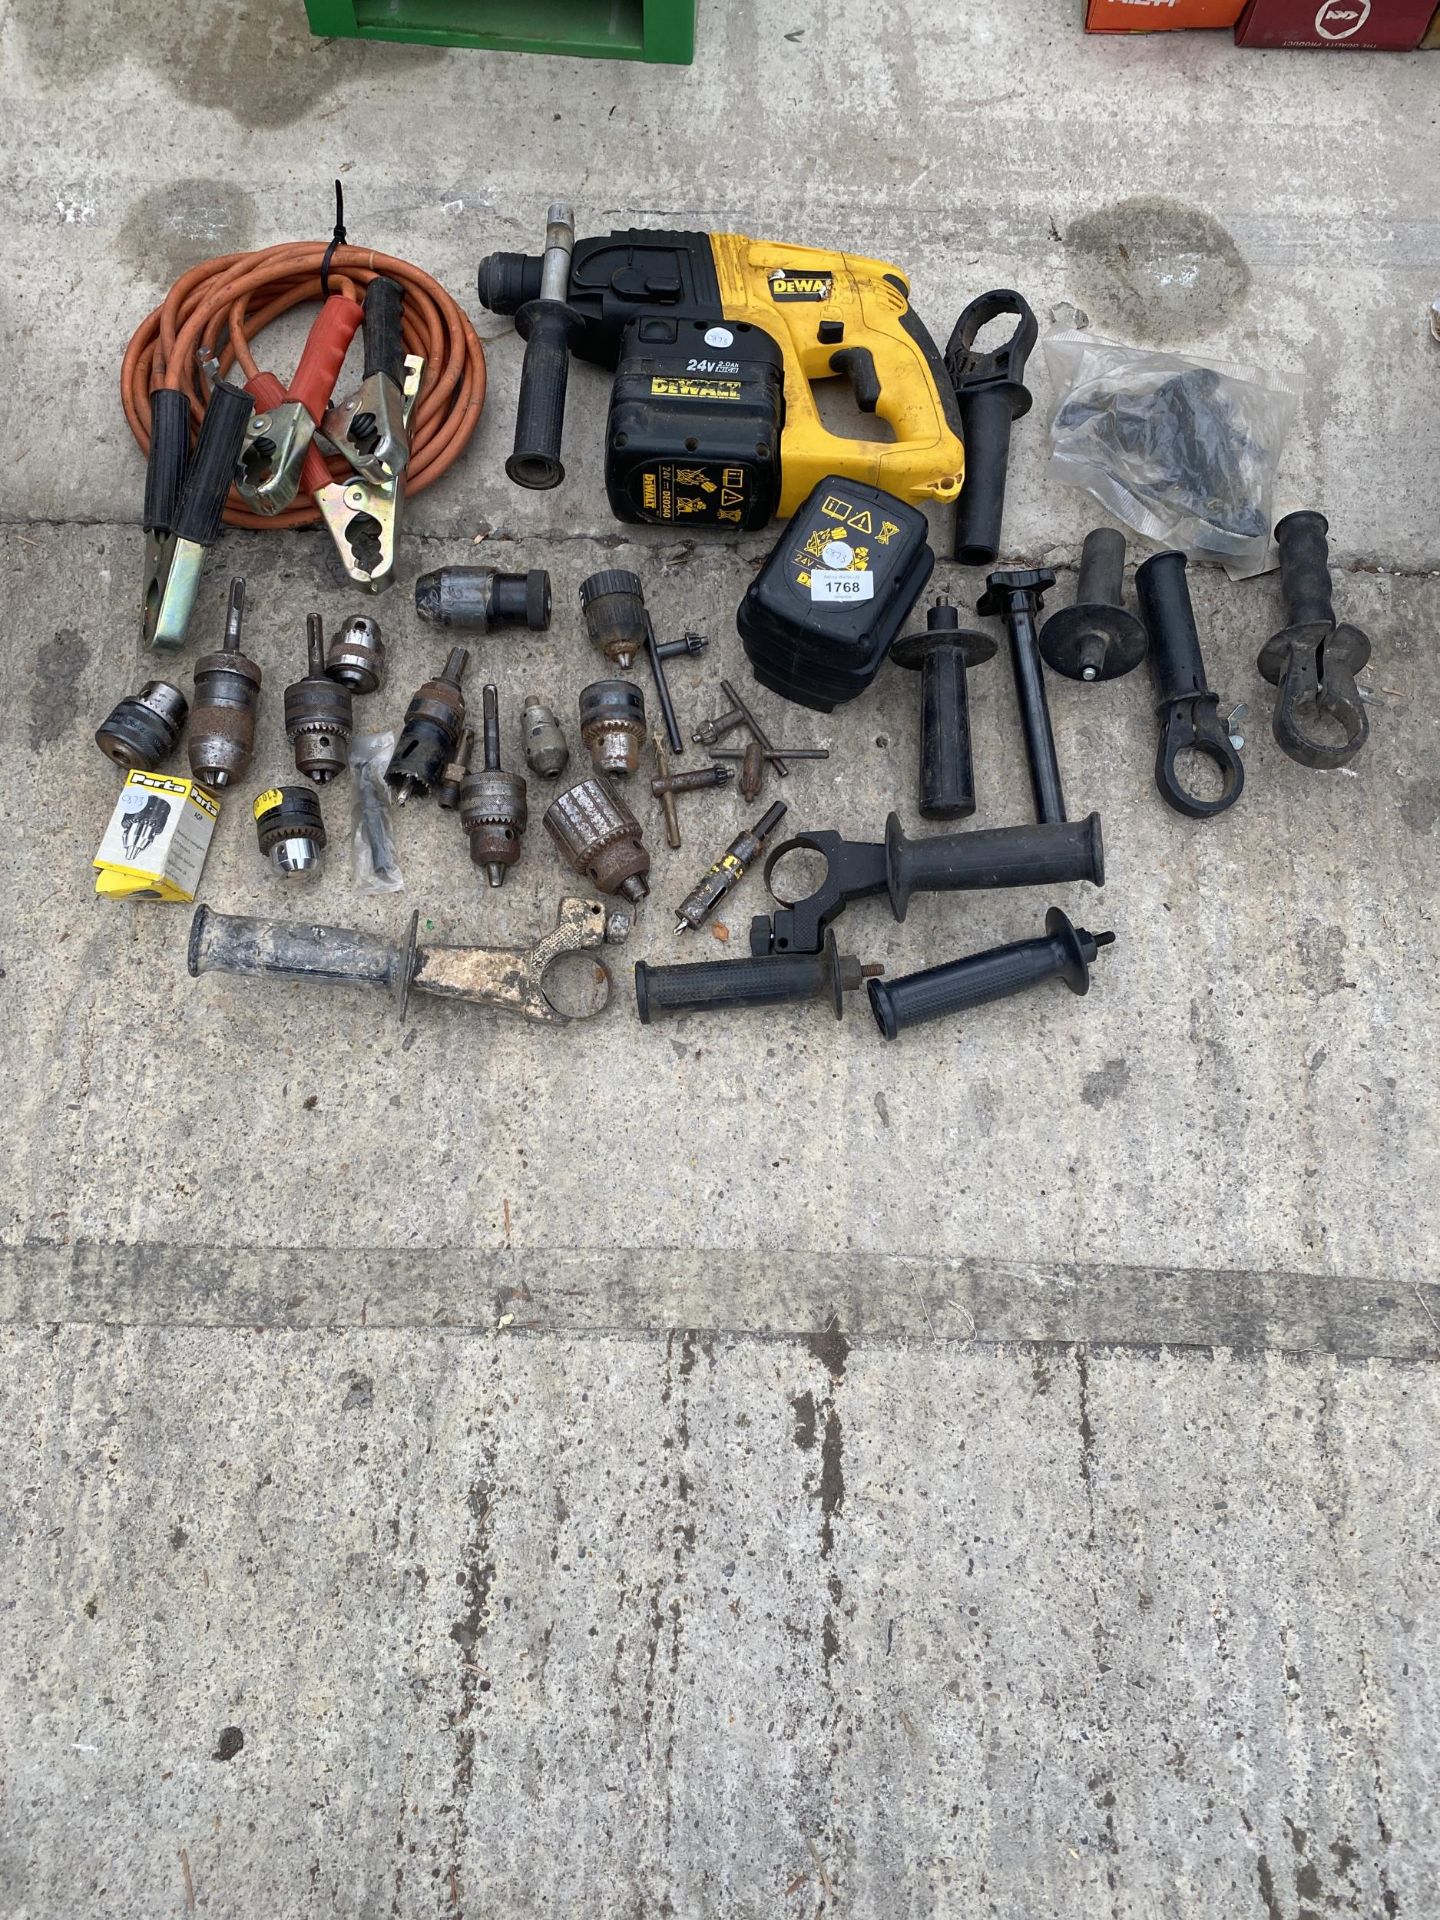 AN ASSORTMENT OF ITEMS TO INCLUDE A DEWALT BATTERY DRILL, DRILL CHUCKS AND JUMP LEADS ETC